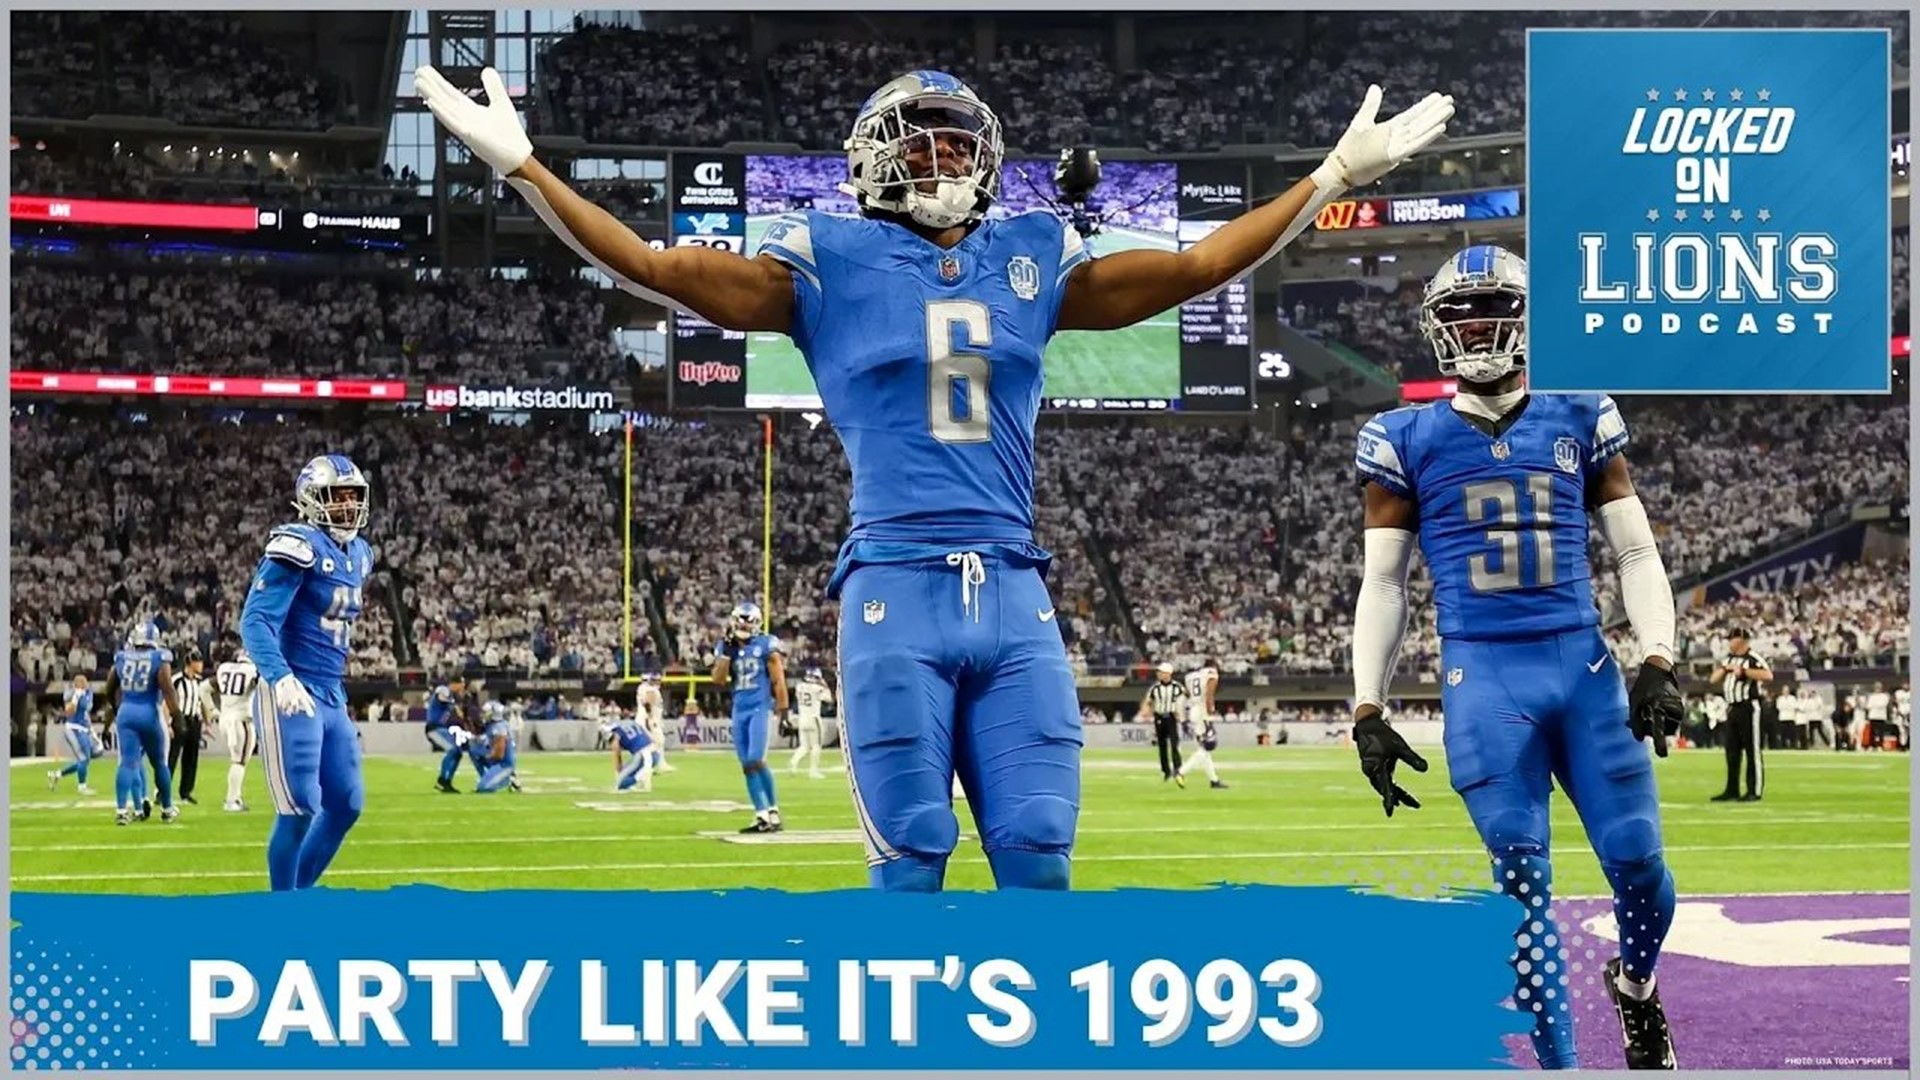 The Detroit Lions are NFC NORTH DIVISION CHAMPIONS!